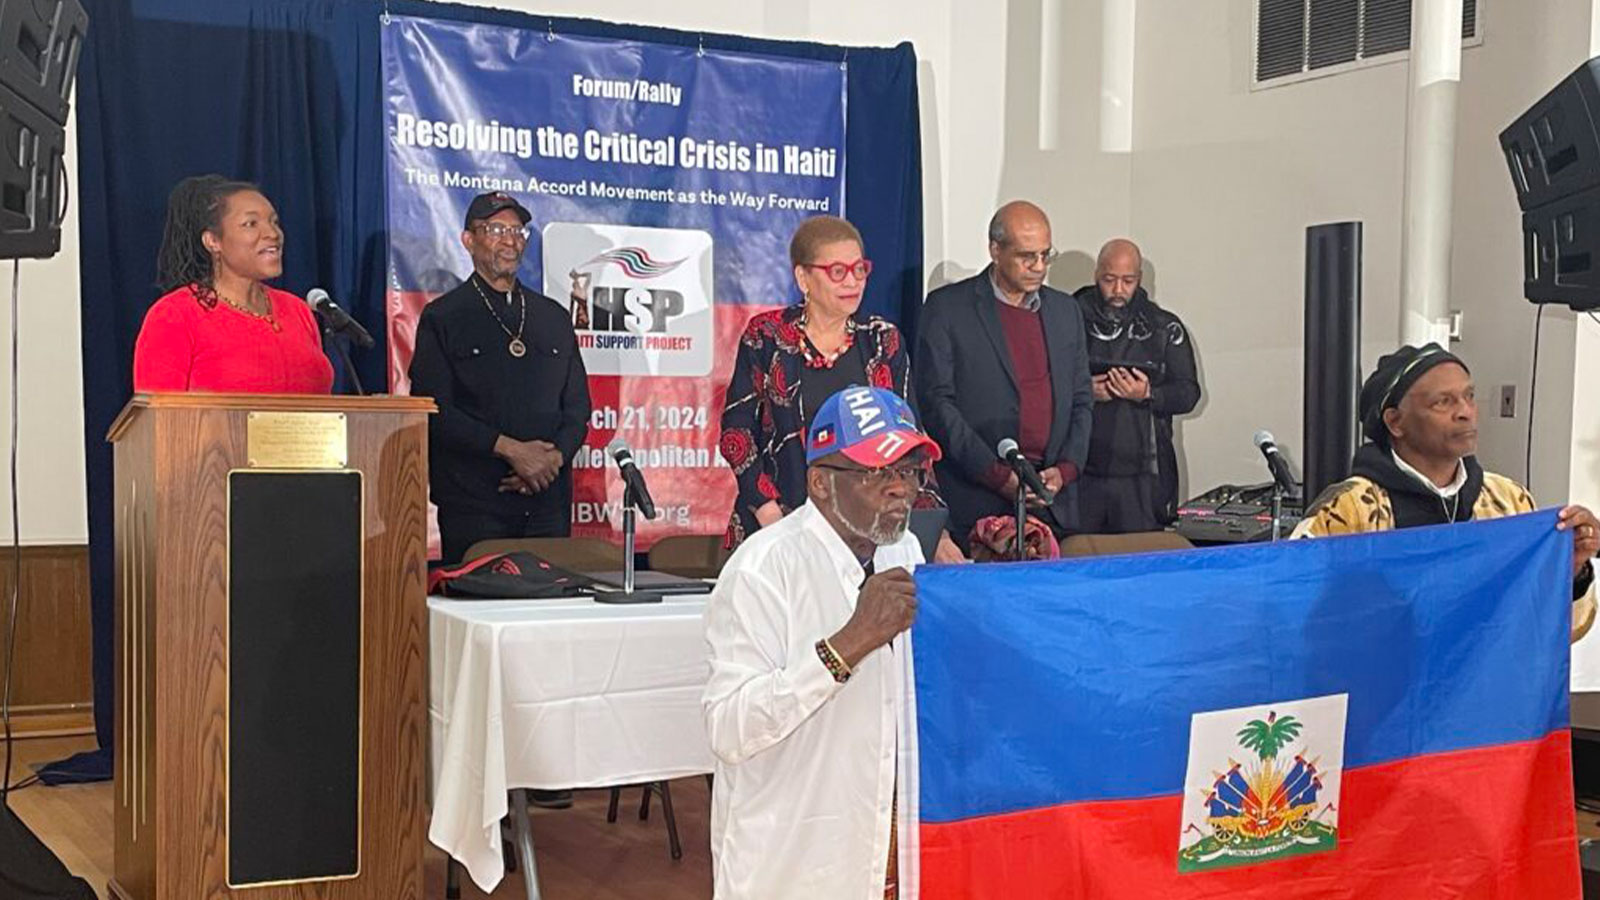 Haiti Support Project (HSP) hosts rally for Montana Accord